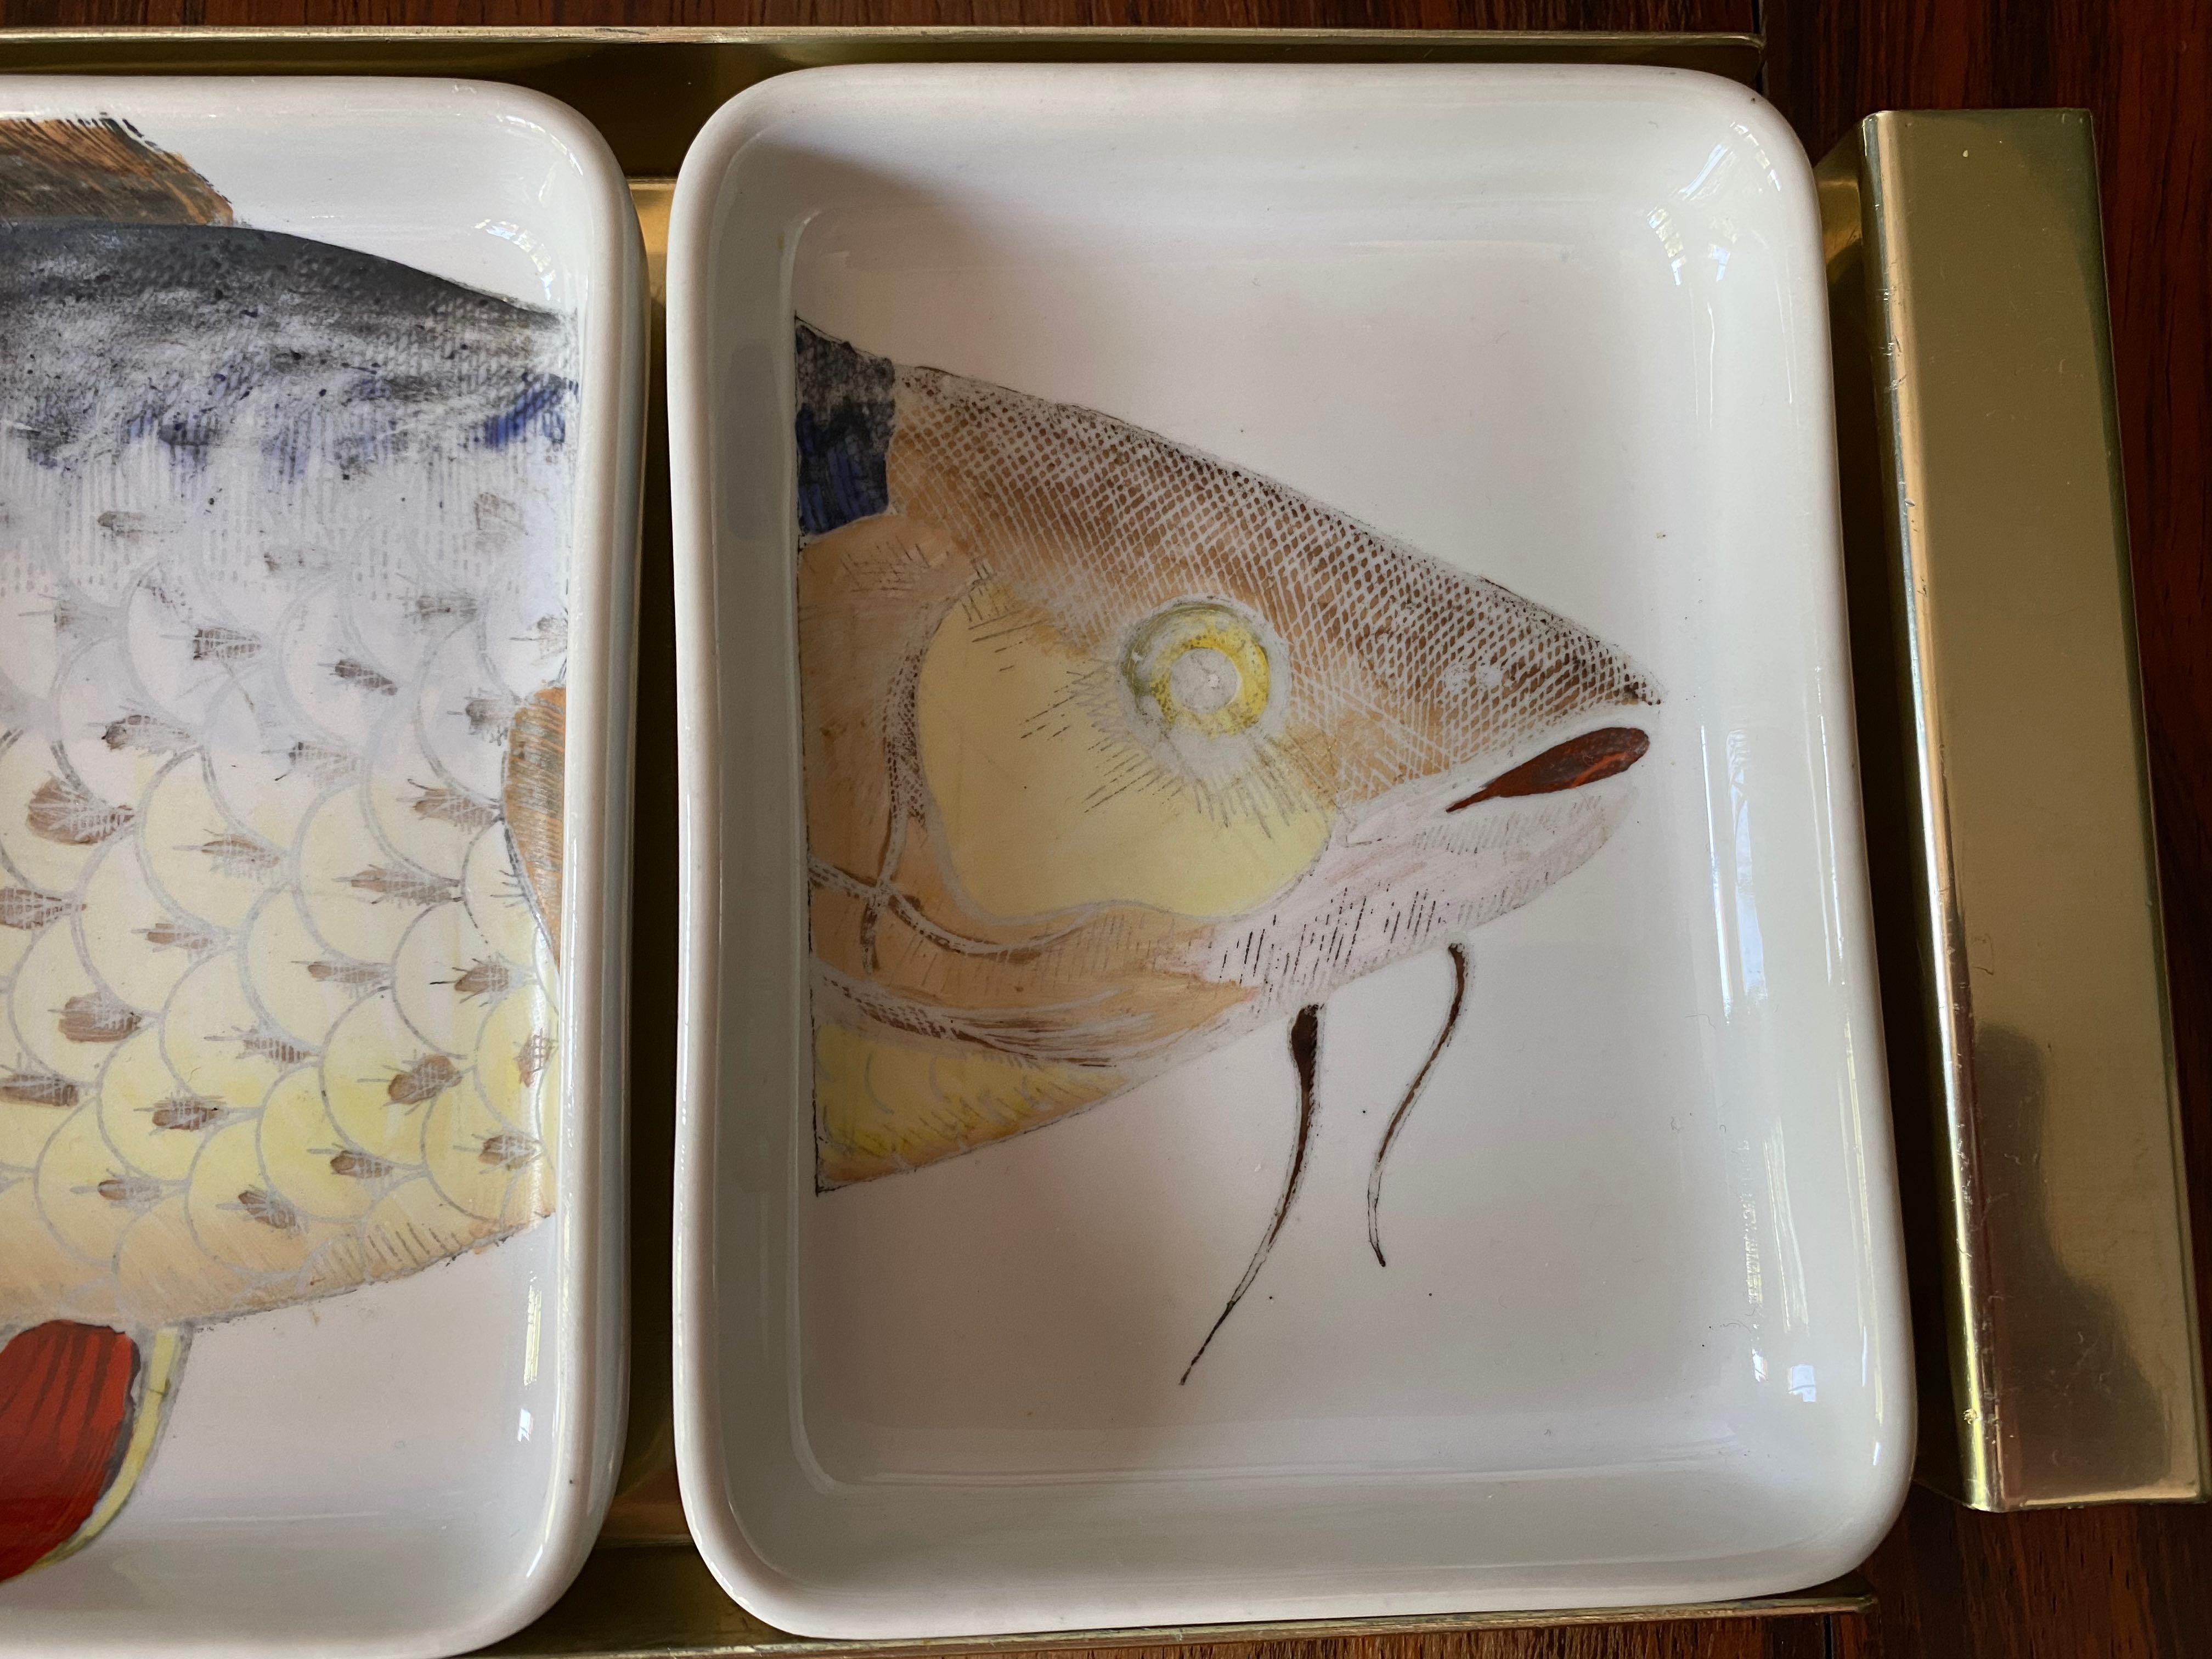 Rare 1960s Fish Pesci Appetizer or Hors D'oeuvre Tray by Piero Fornasetti In Good Condition For Sale In London, London